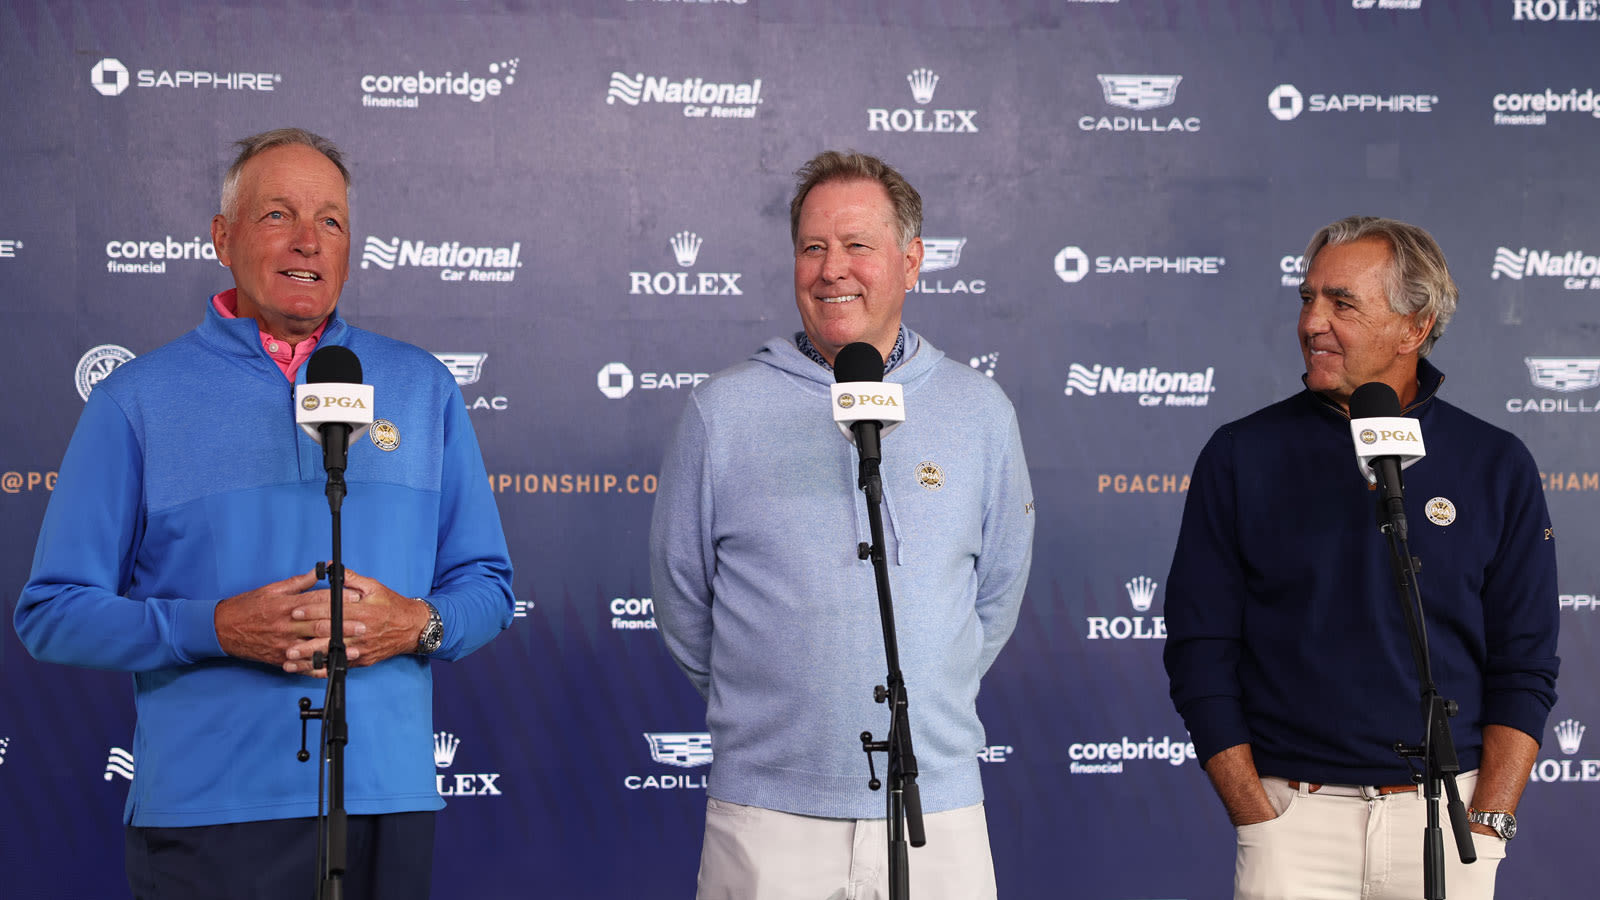 PGA of America Chief Championships Officer, Kerry Haigh, speaks with PGA of America President, John Lindert, PGA, and PGA of America CEO, Seth Waugh during a press conference before the PGA Championship at Oak Hill Country Club.